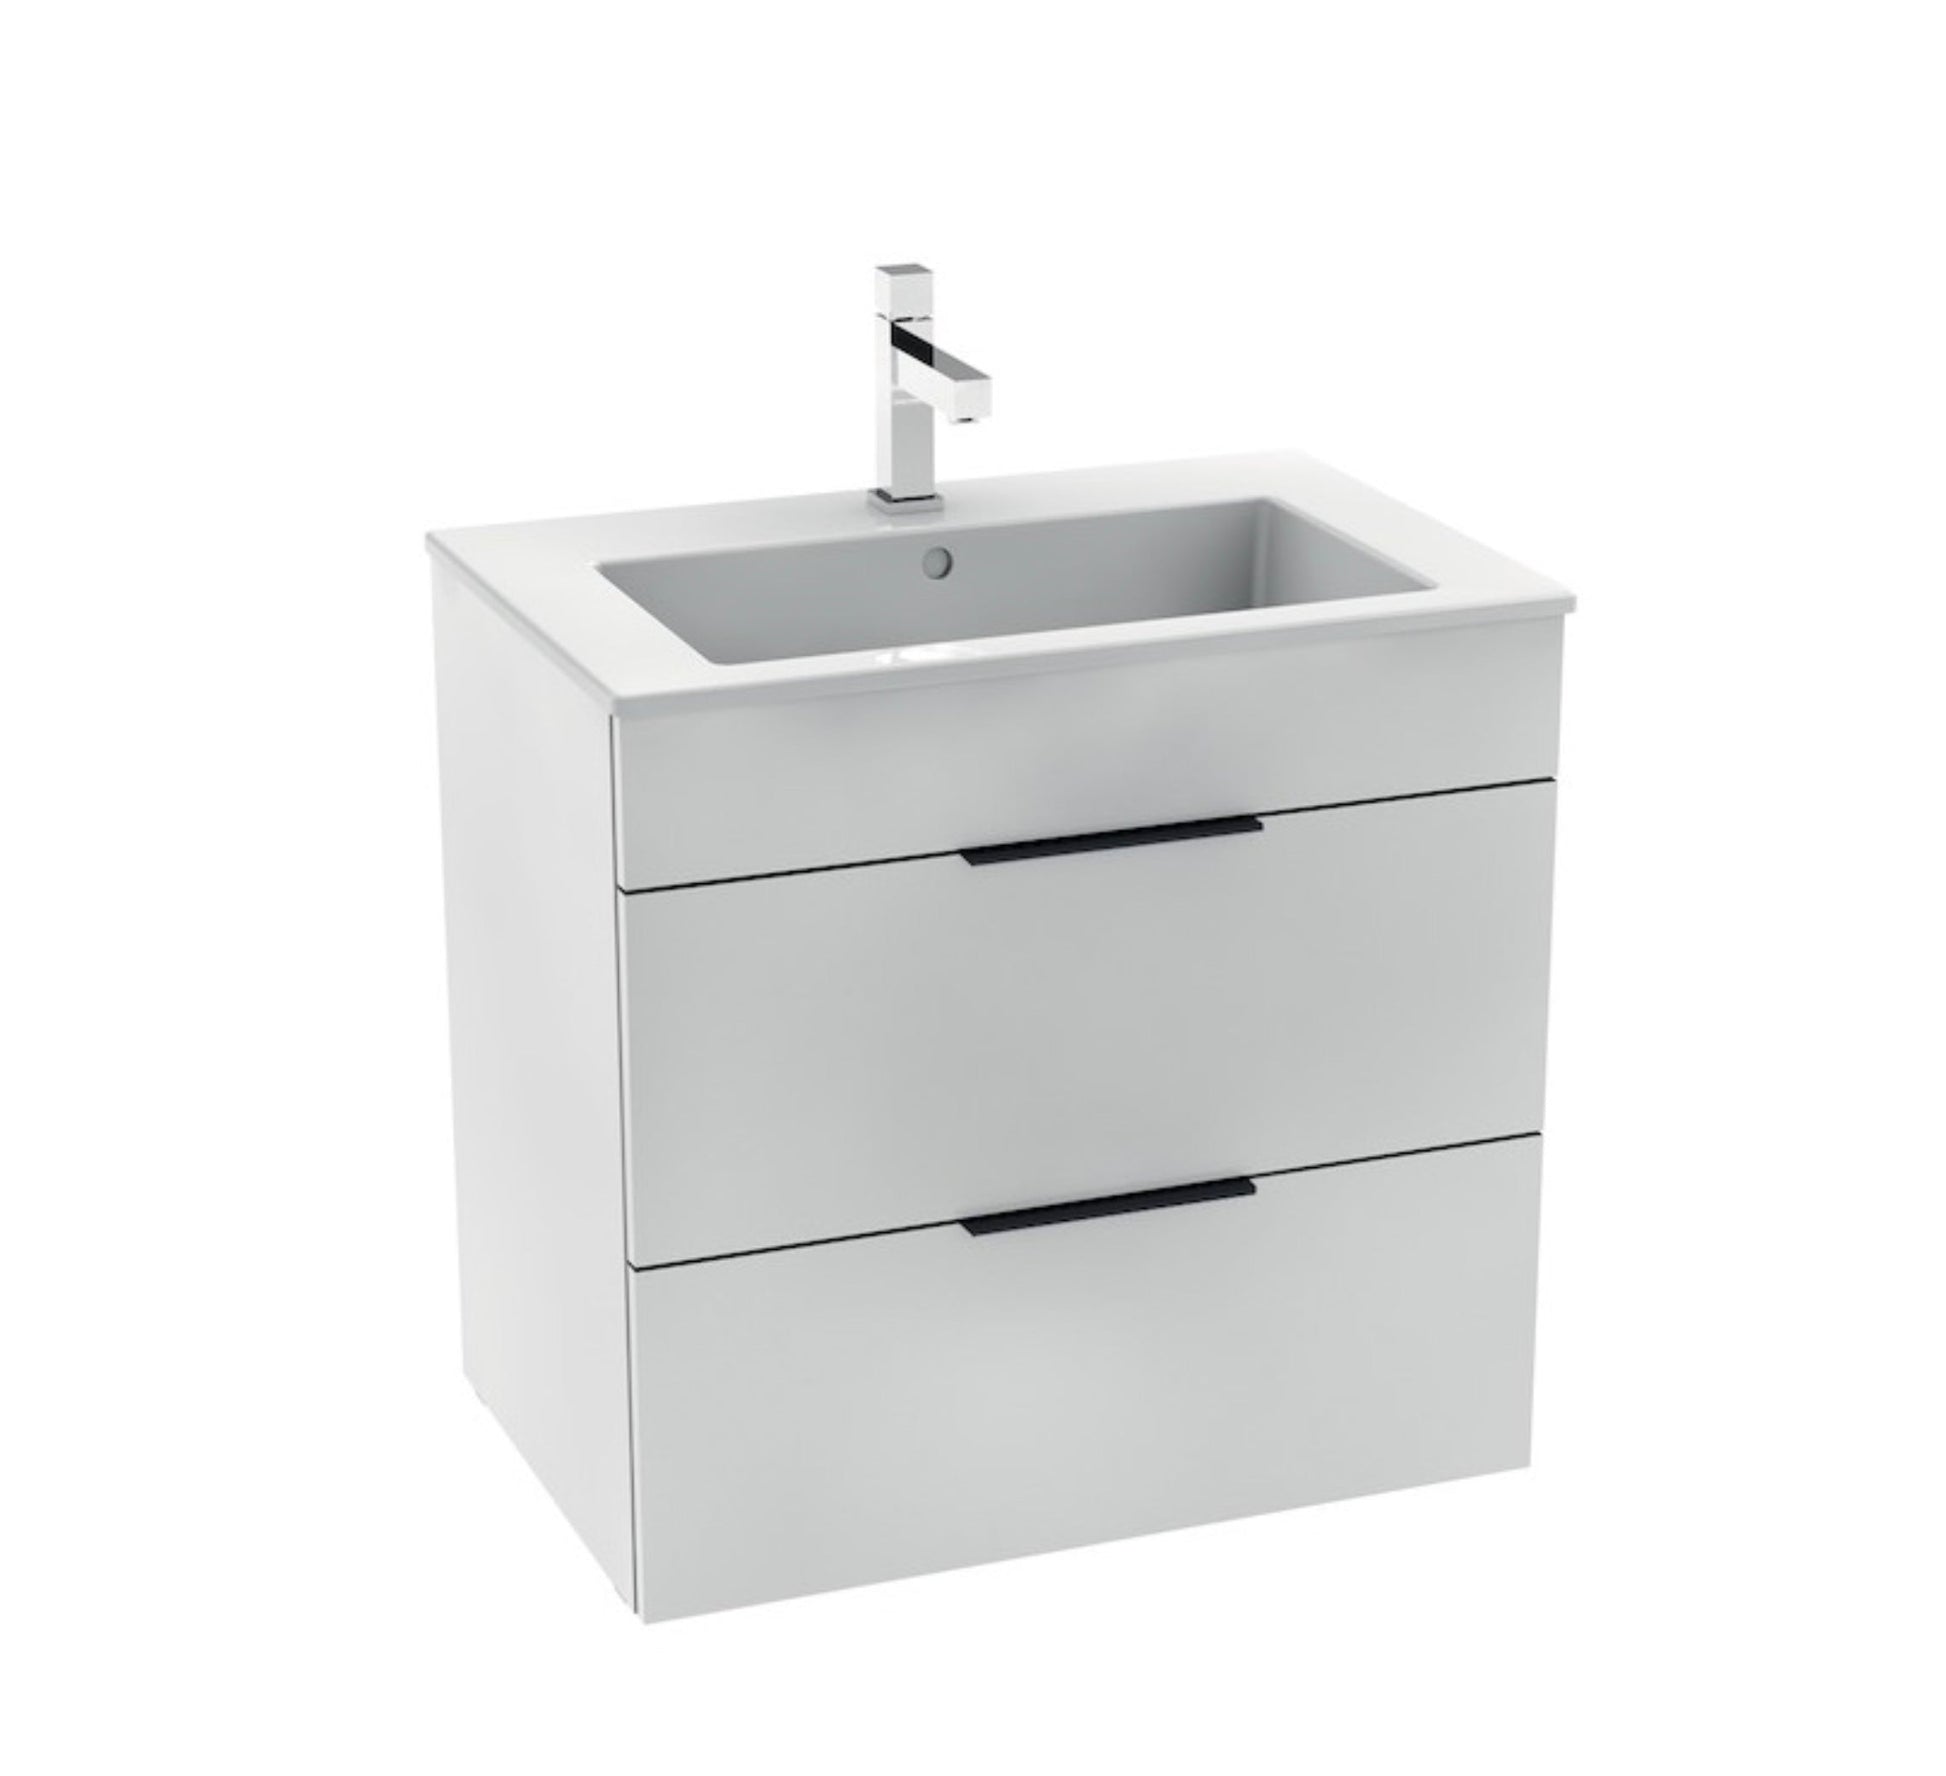 JIKA CUBE VANITY UNIT PACK INCLUDING WASHBASIN 65X43CM WITH 2 DRAWERS WHITE - 4.5360.2.176.300.1